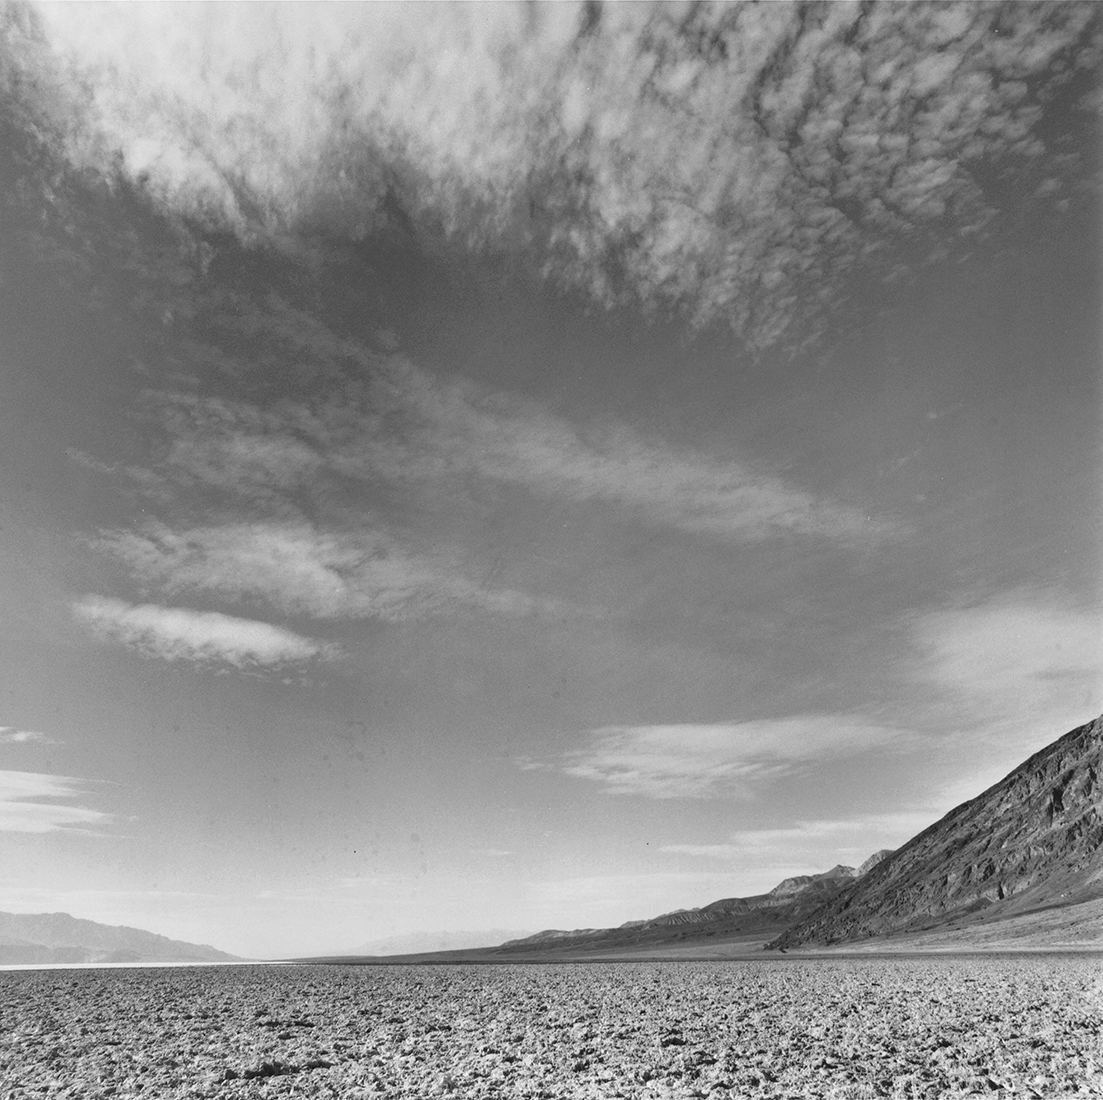 Cloud formations in a vast sky occupy most of the image with Death Valley salt flats and surrounding hills along the bottom